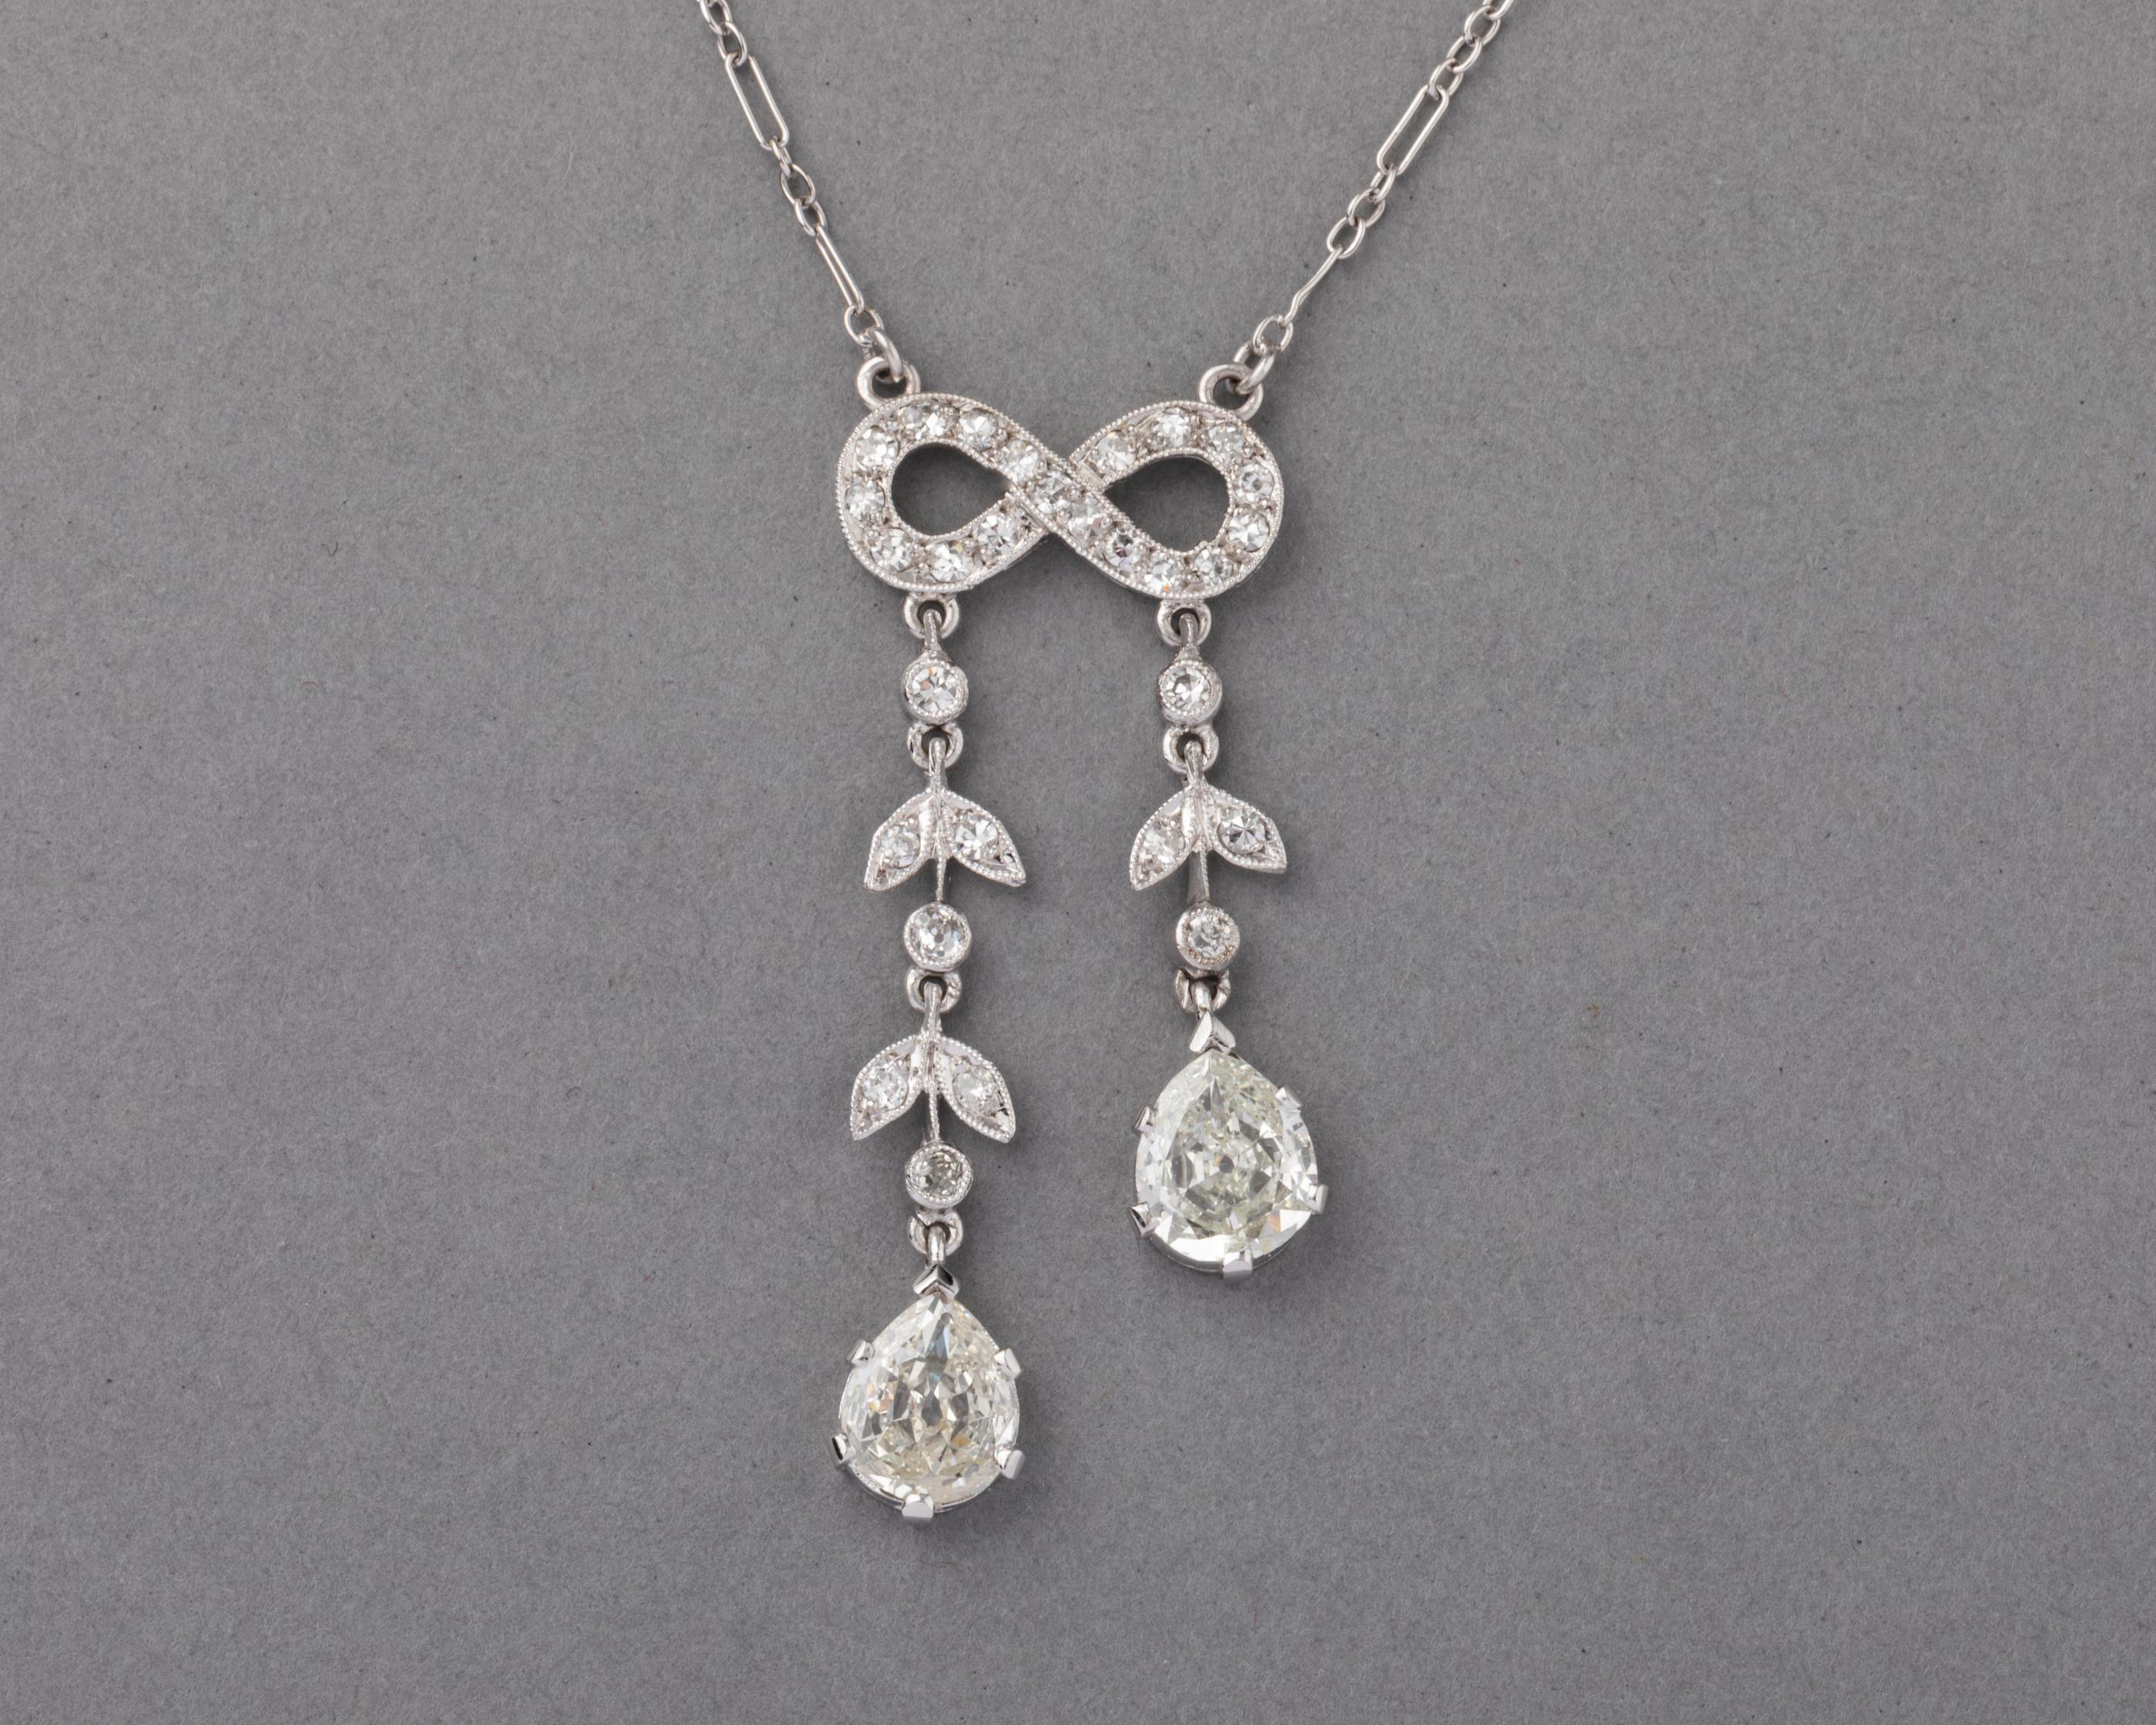 Very lovely antique necklace, French made circa 1910.
Made in Platinum and set with two pear diamonds of 0.75 Carats each. 1.90 carats total for the diamonds. The two pear are clear, the color estimate is J.
The length of necklace is 40 cm or 16